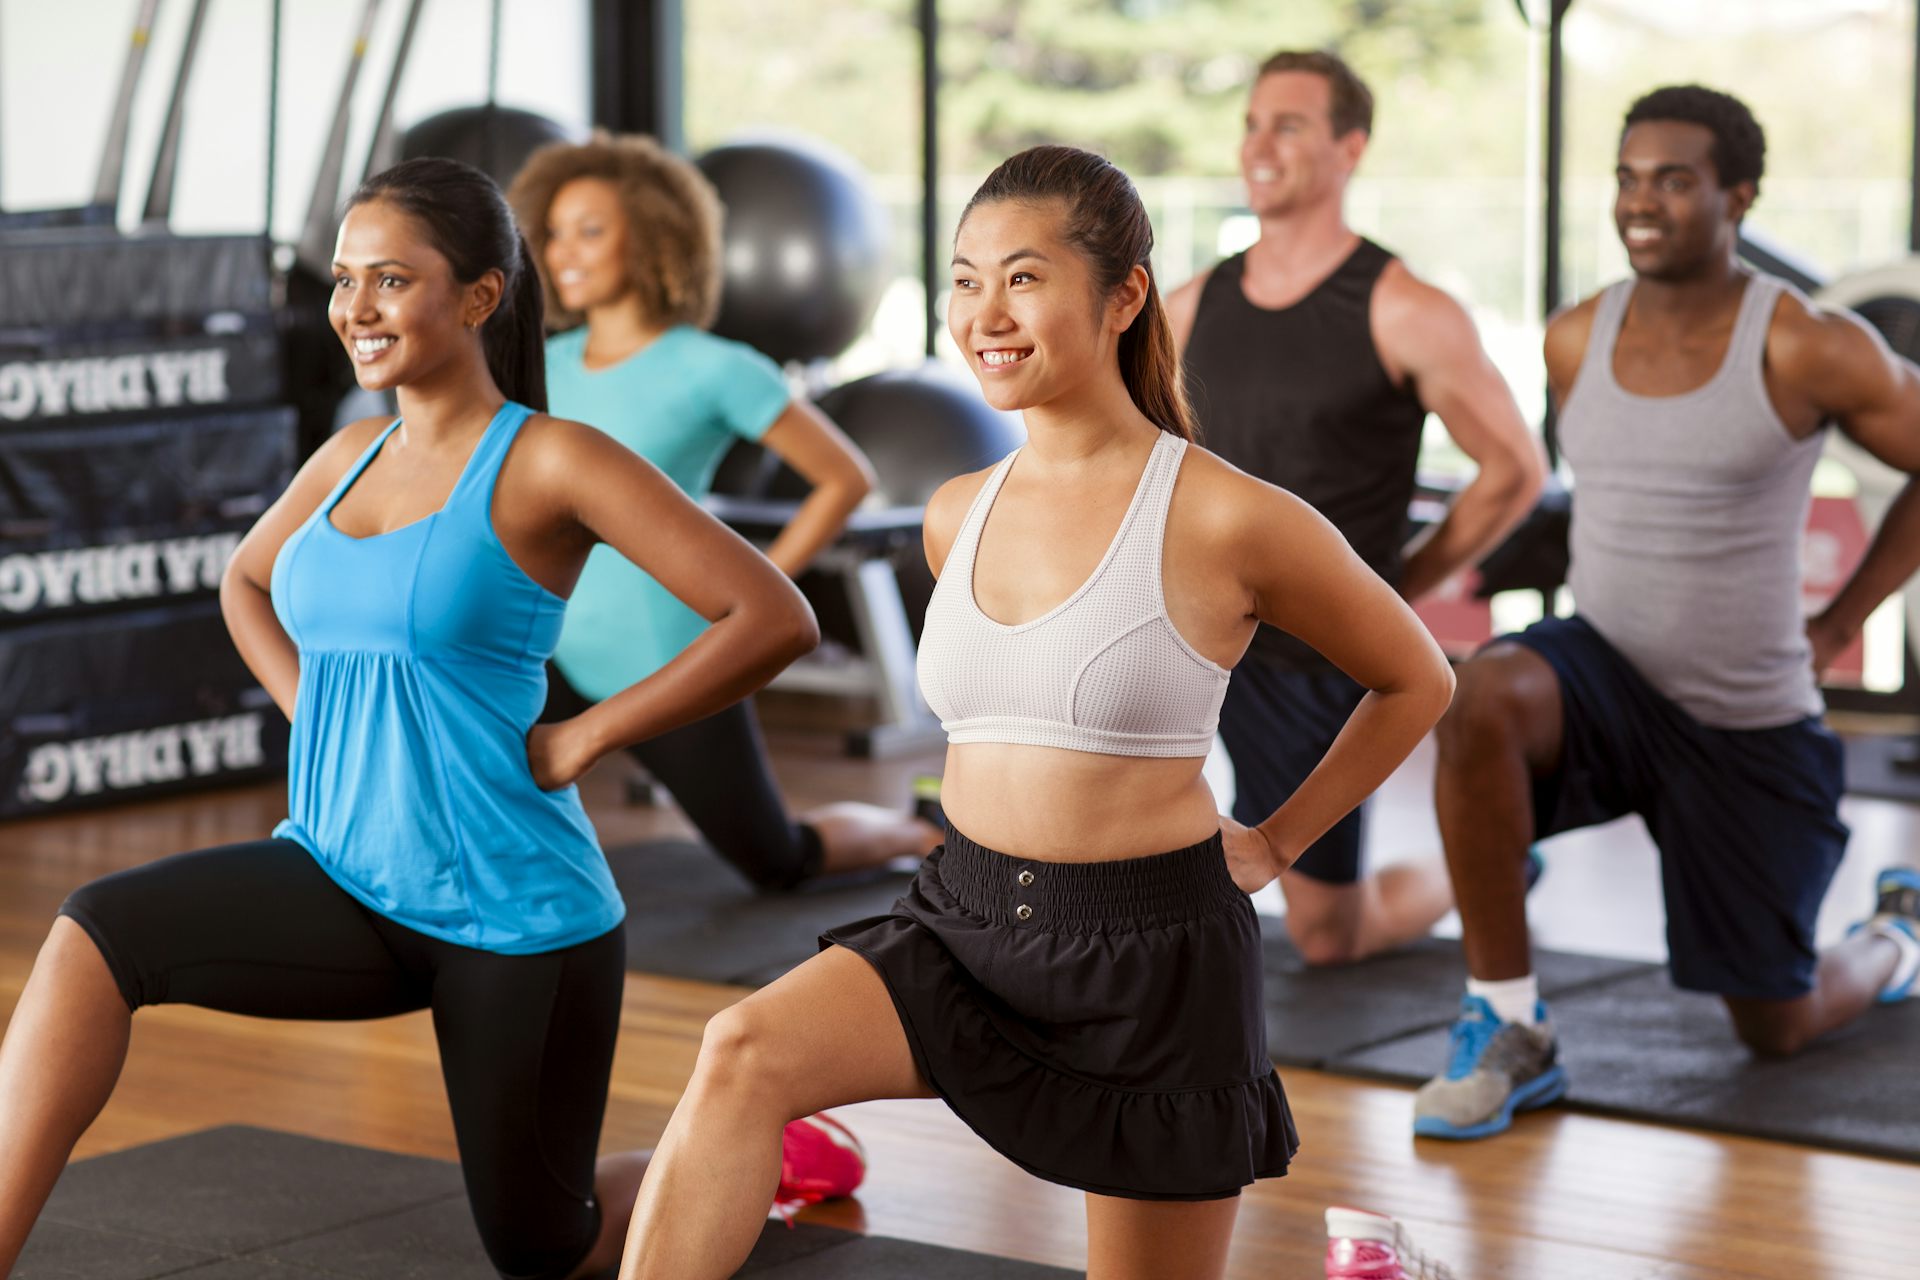 There are undeniable benefits to group exercise, such as group cohesion and group support. (Shutterstock)